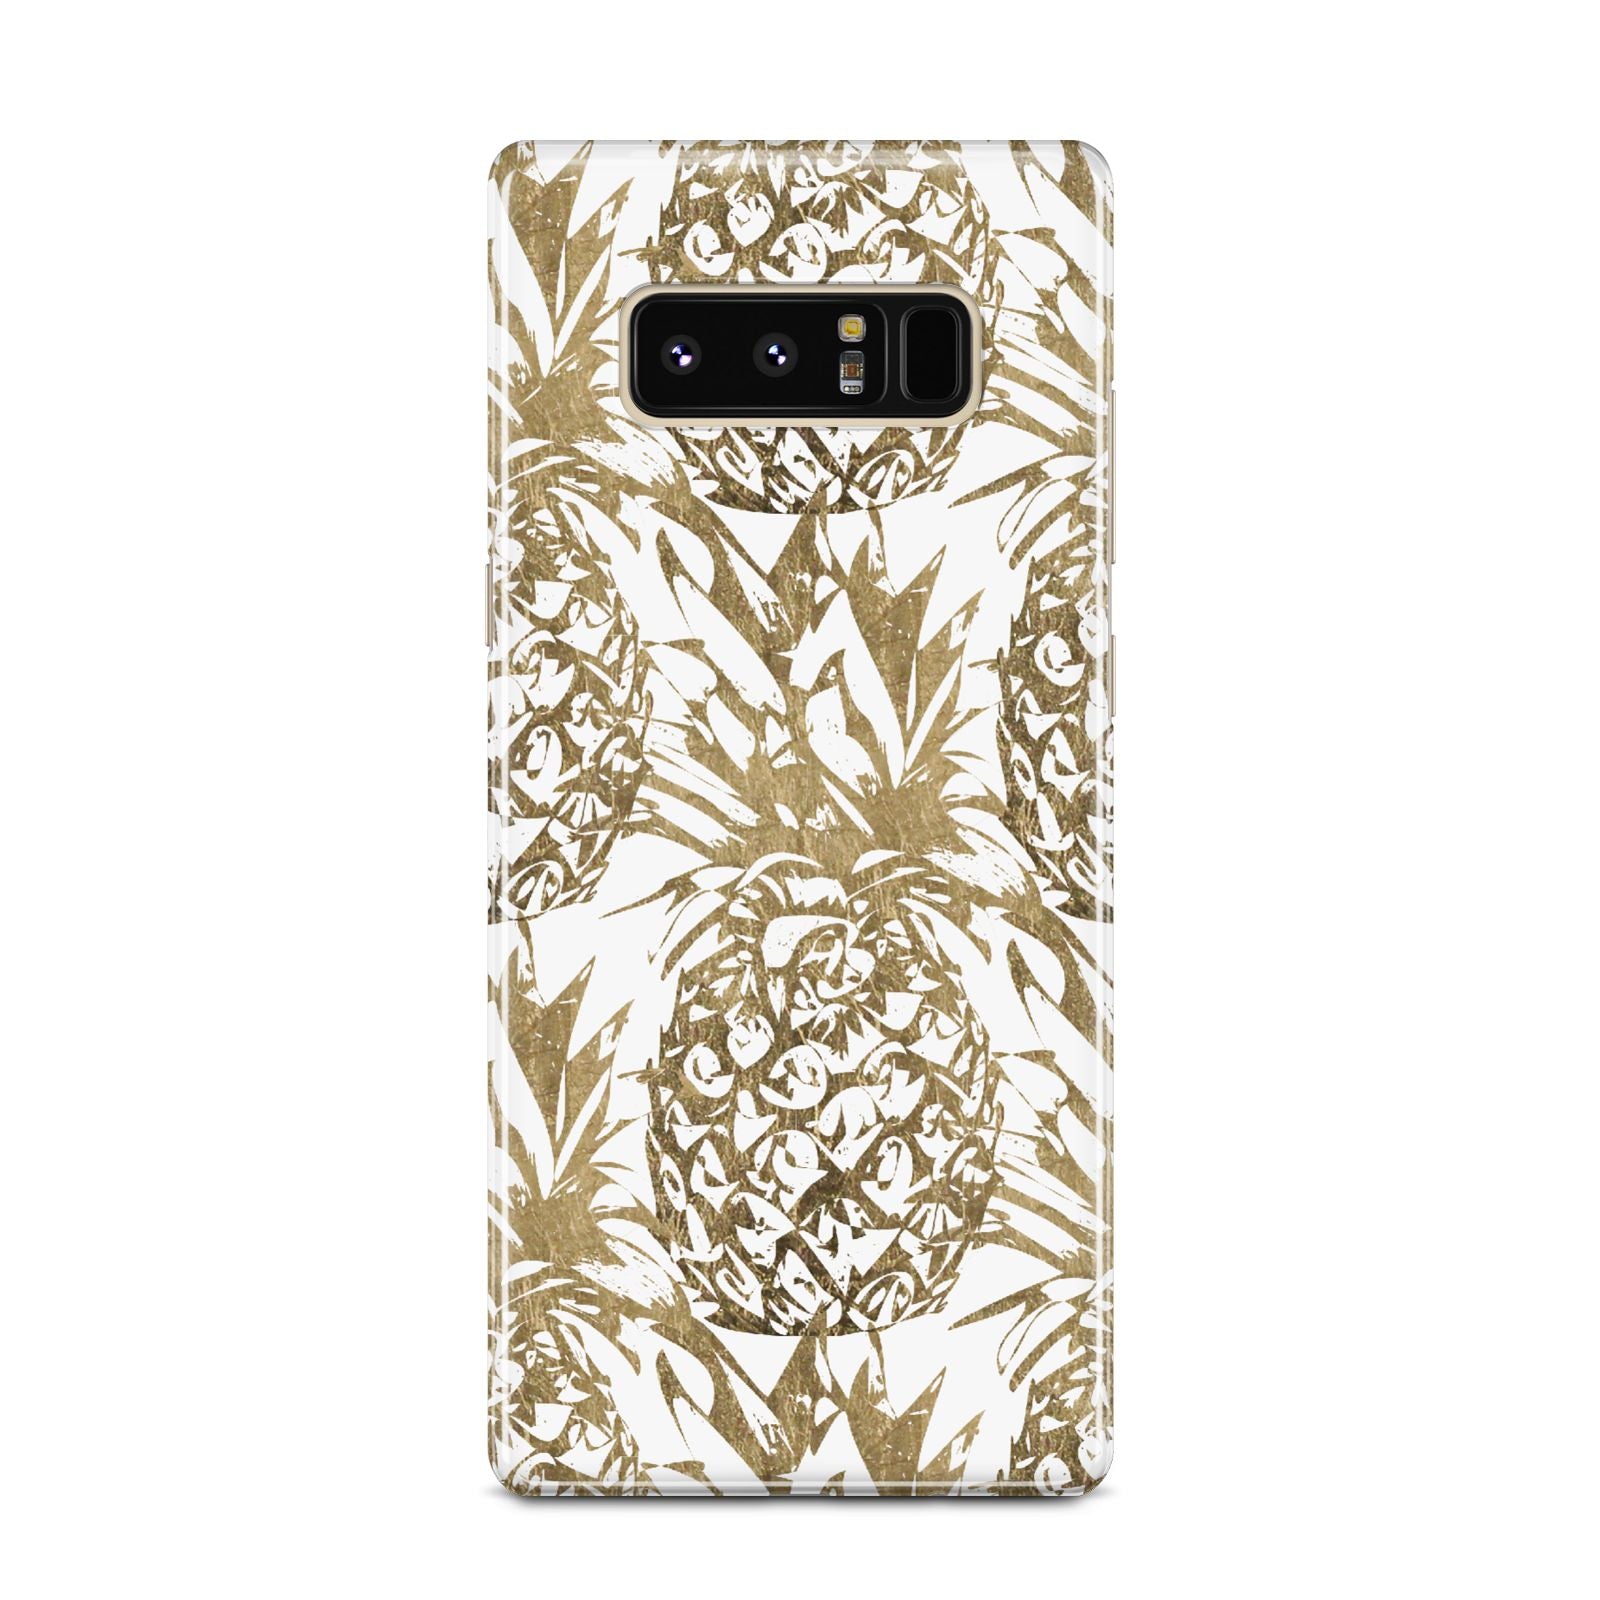 Gold Pineapple Fruit Samsung Galaxy Note 8 Case